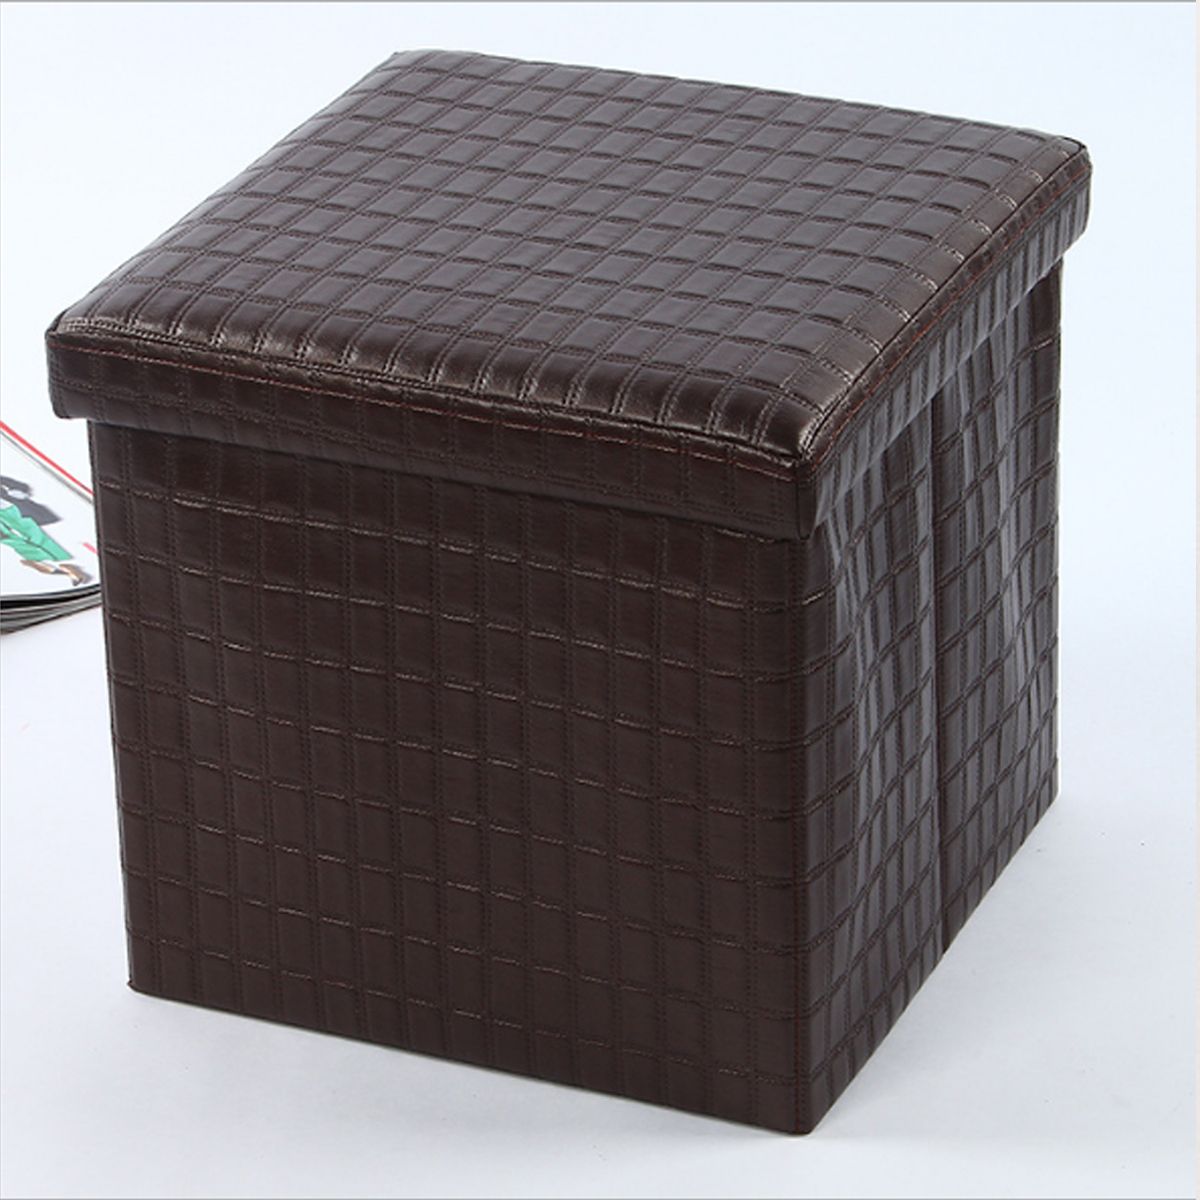 Famous 12'' Cube Ottoman Storage Box Lounge Seat Footstools, Stool Seat And Regarding Black Faux Leather Cube Ottomans (View 9 of 10)